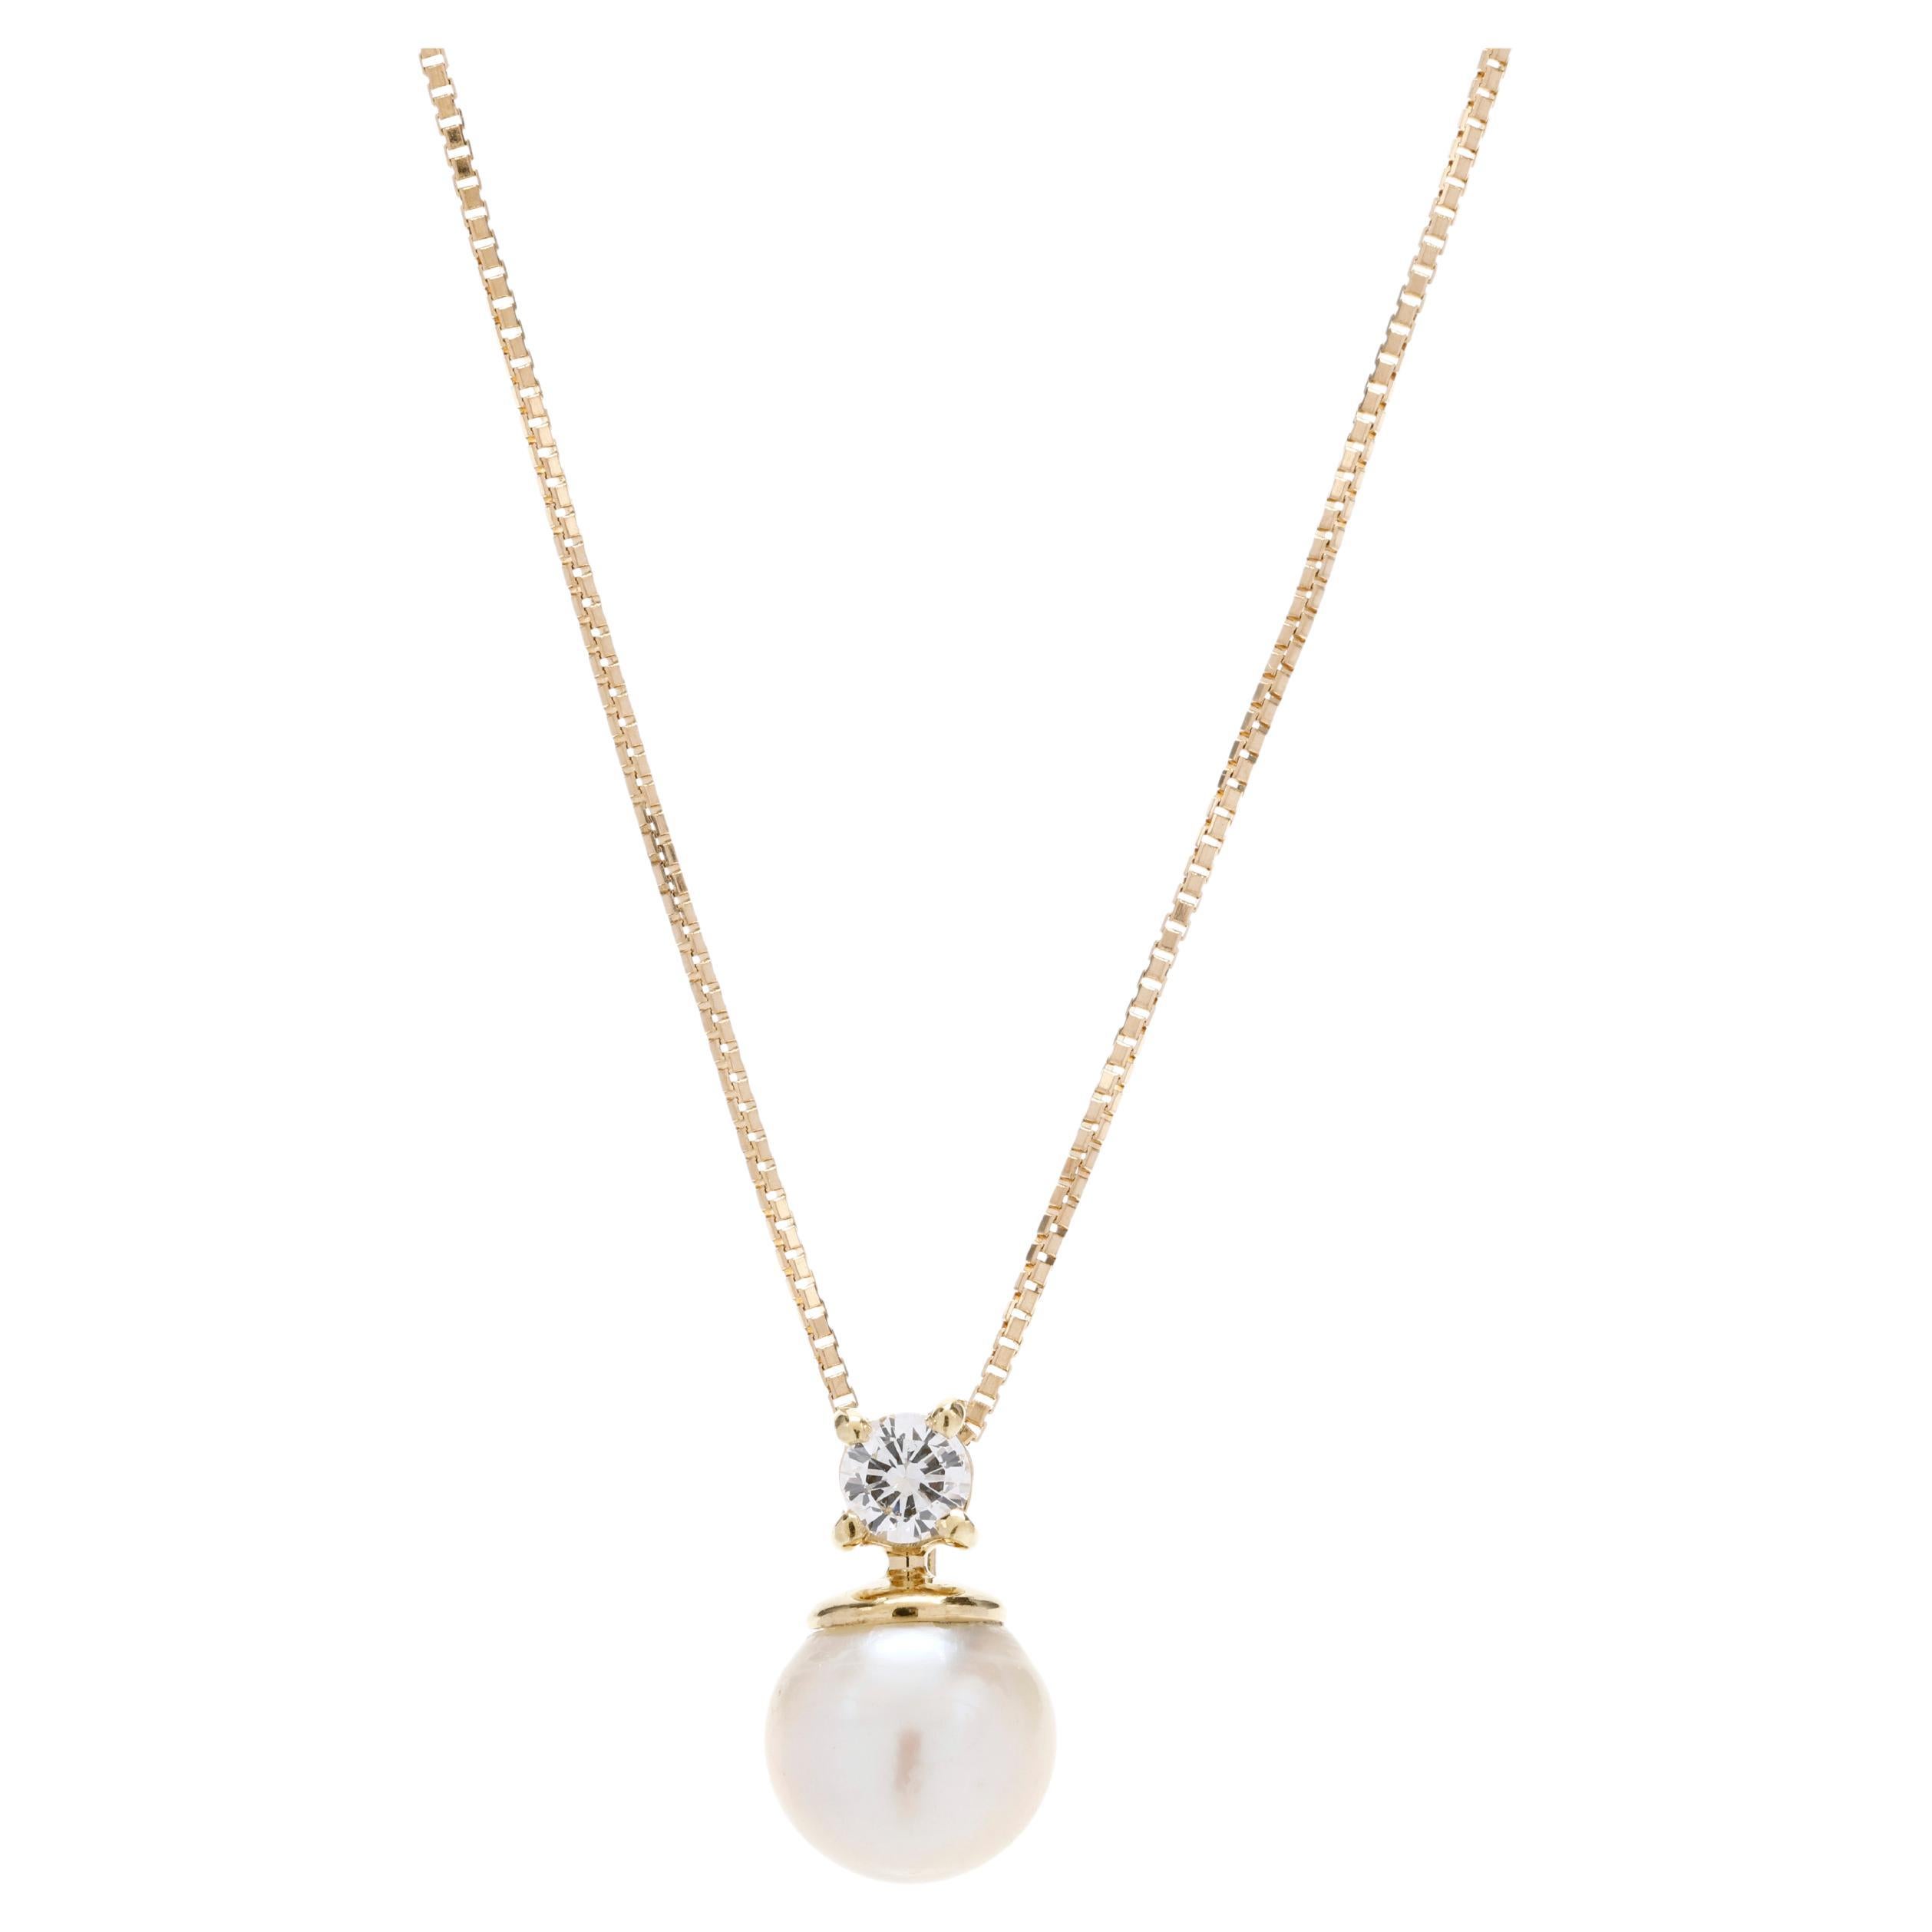 0.15ctw Diamond and Pearl Pendant Necklace 18k Yellow Gold, Length 18 Inches